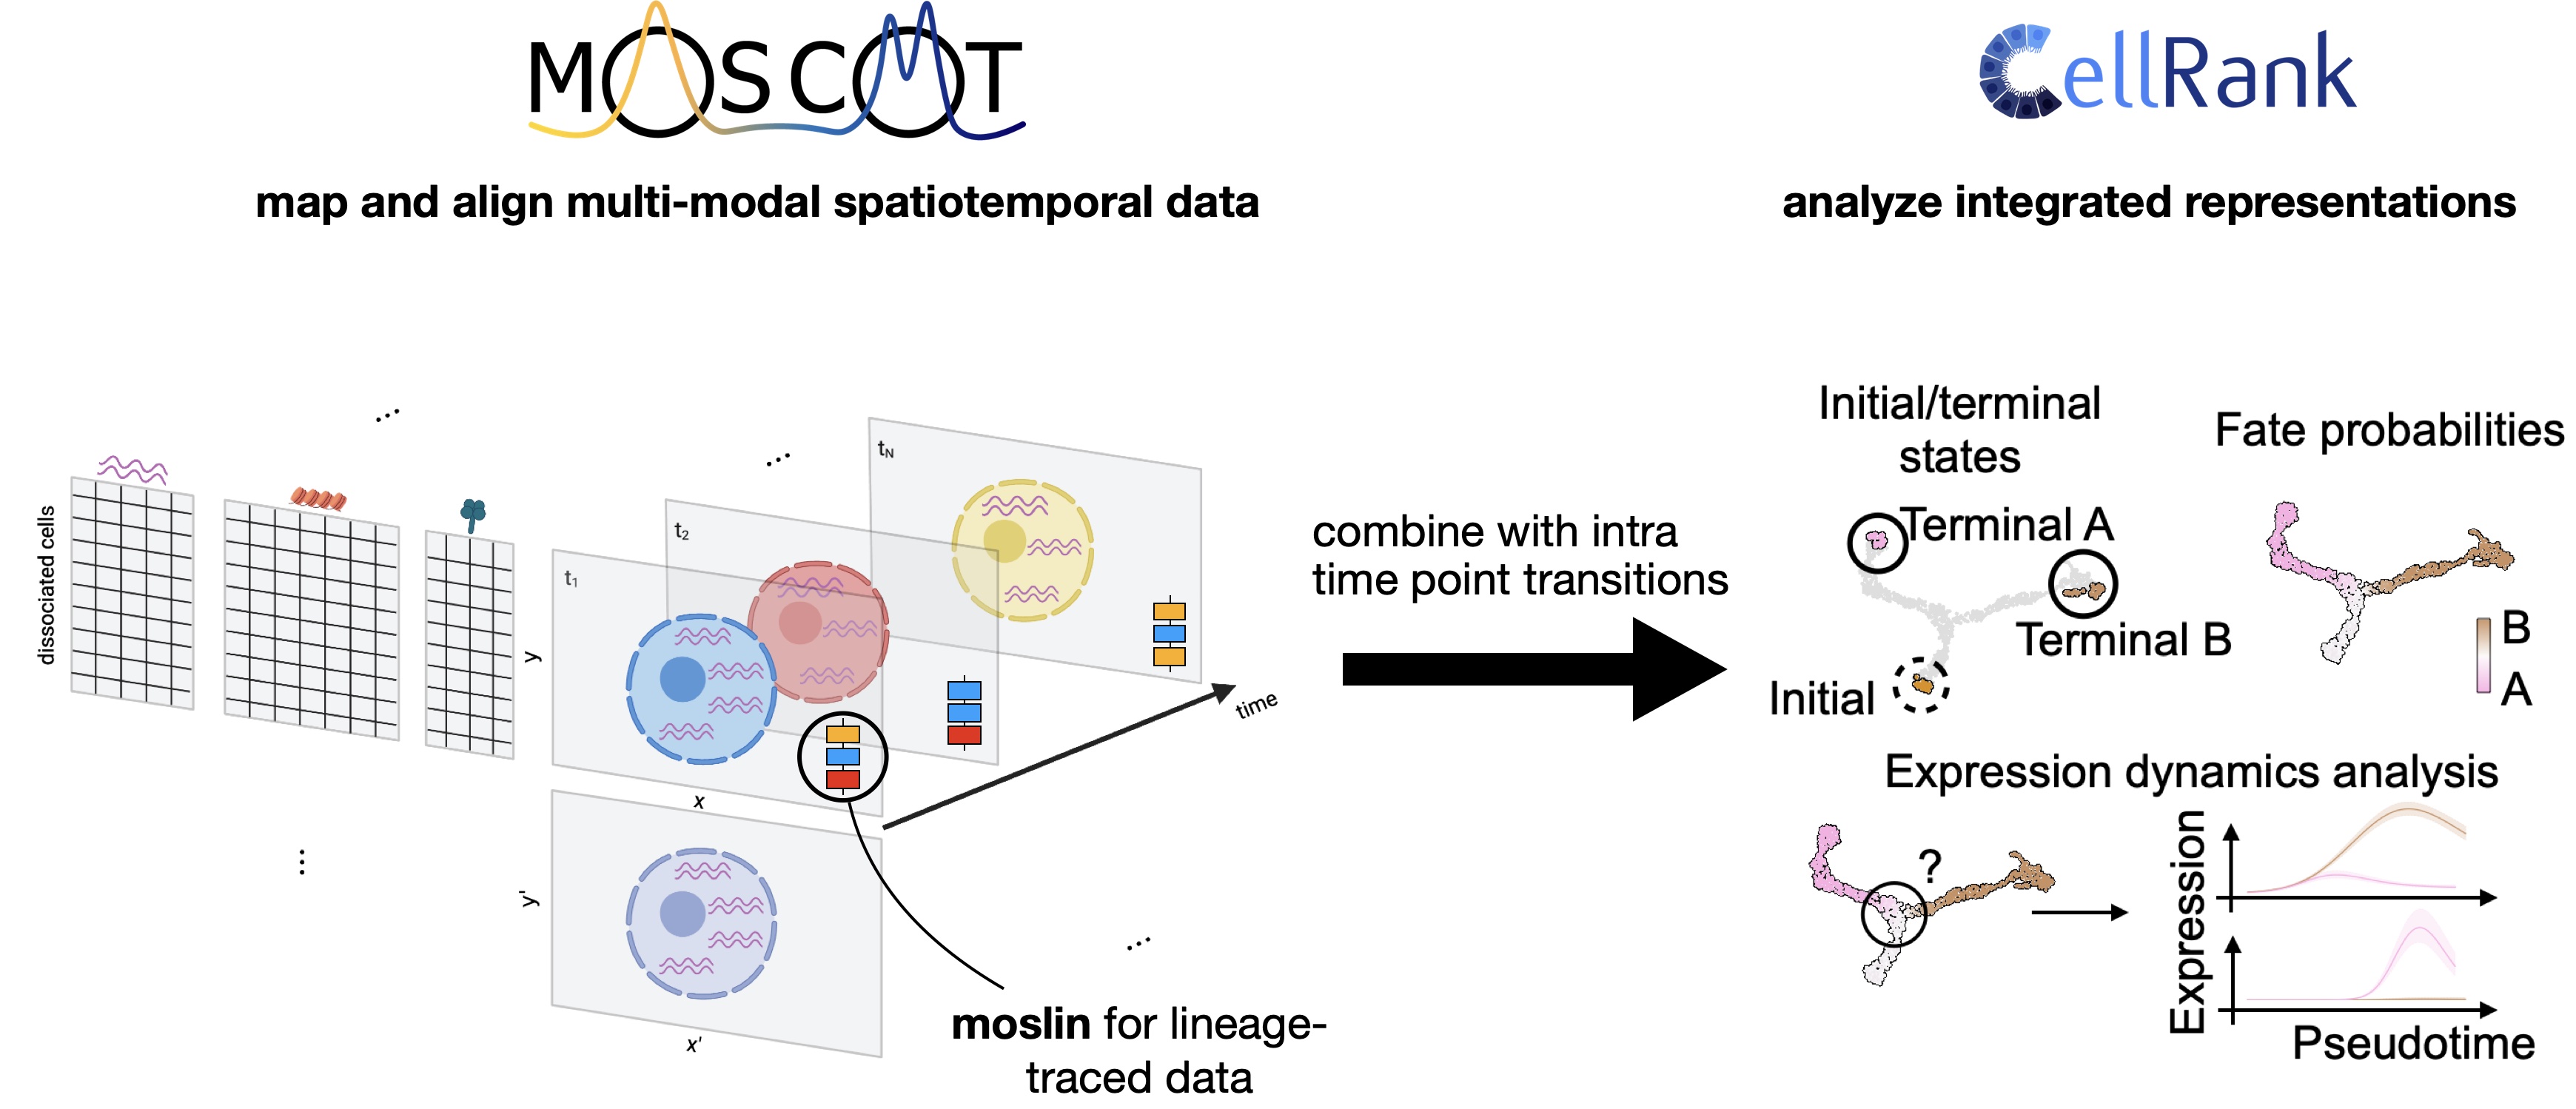 Moscot and CellRank interface to analyze dynamics in complex spatio-temporal datasets.